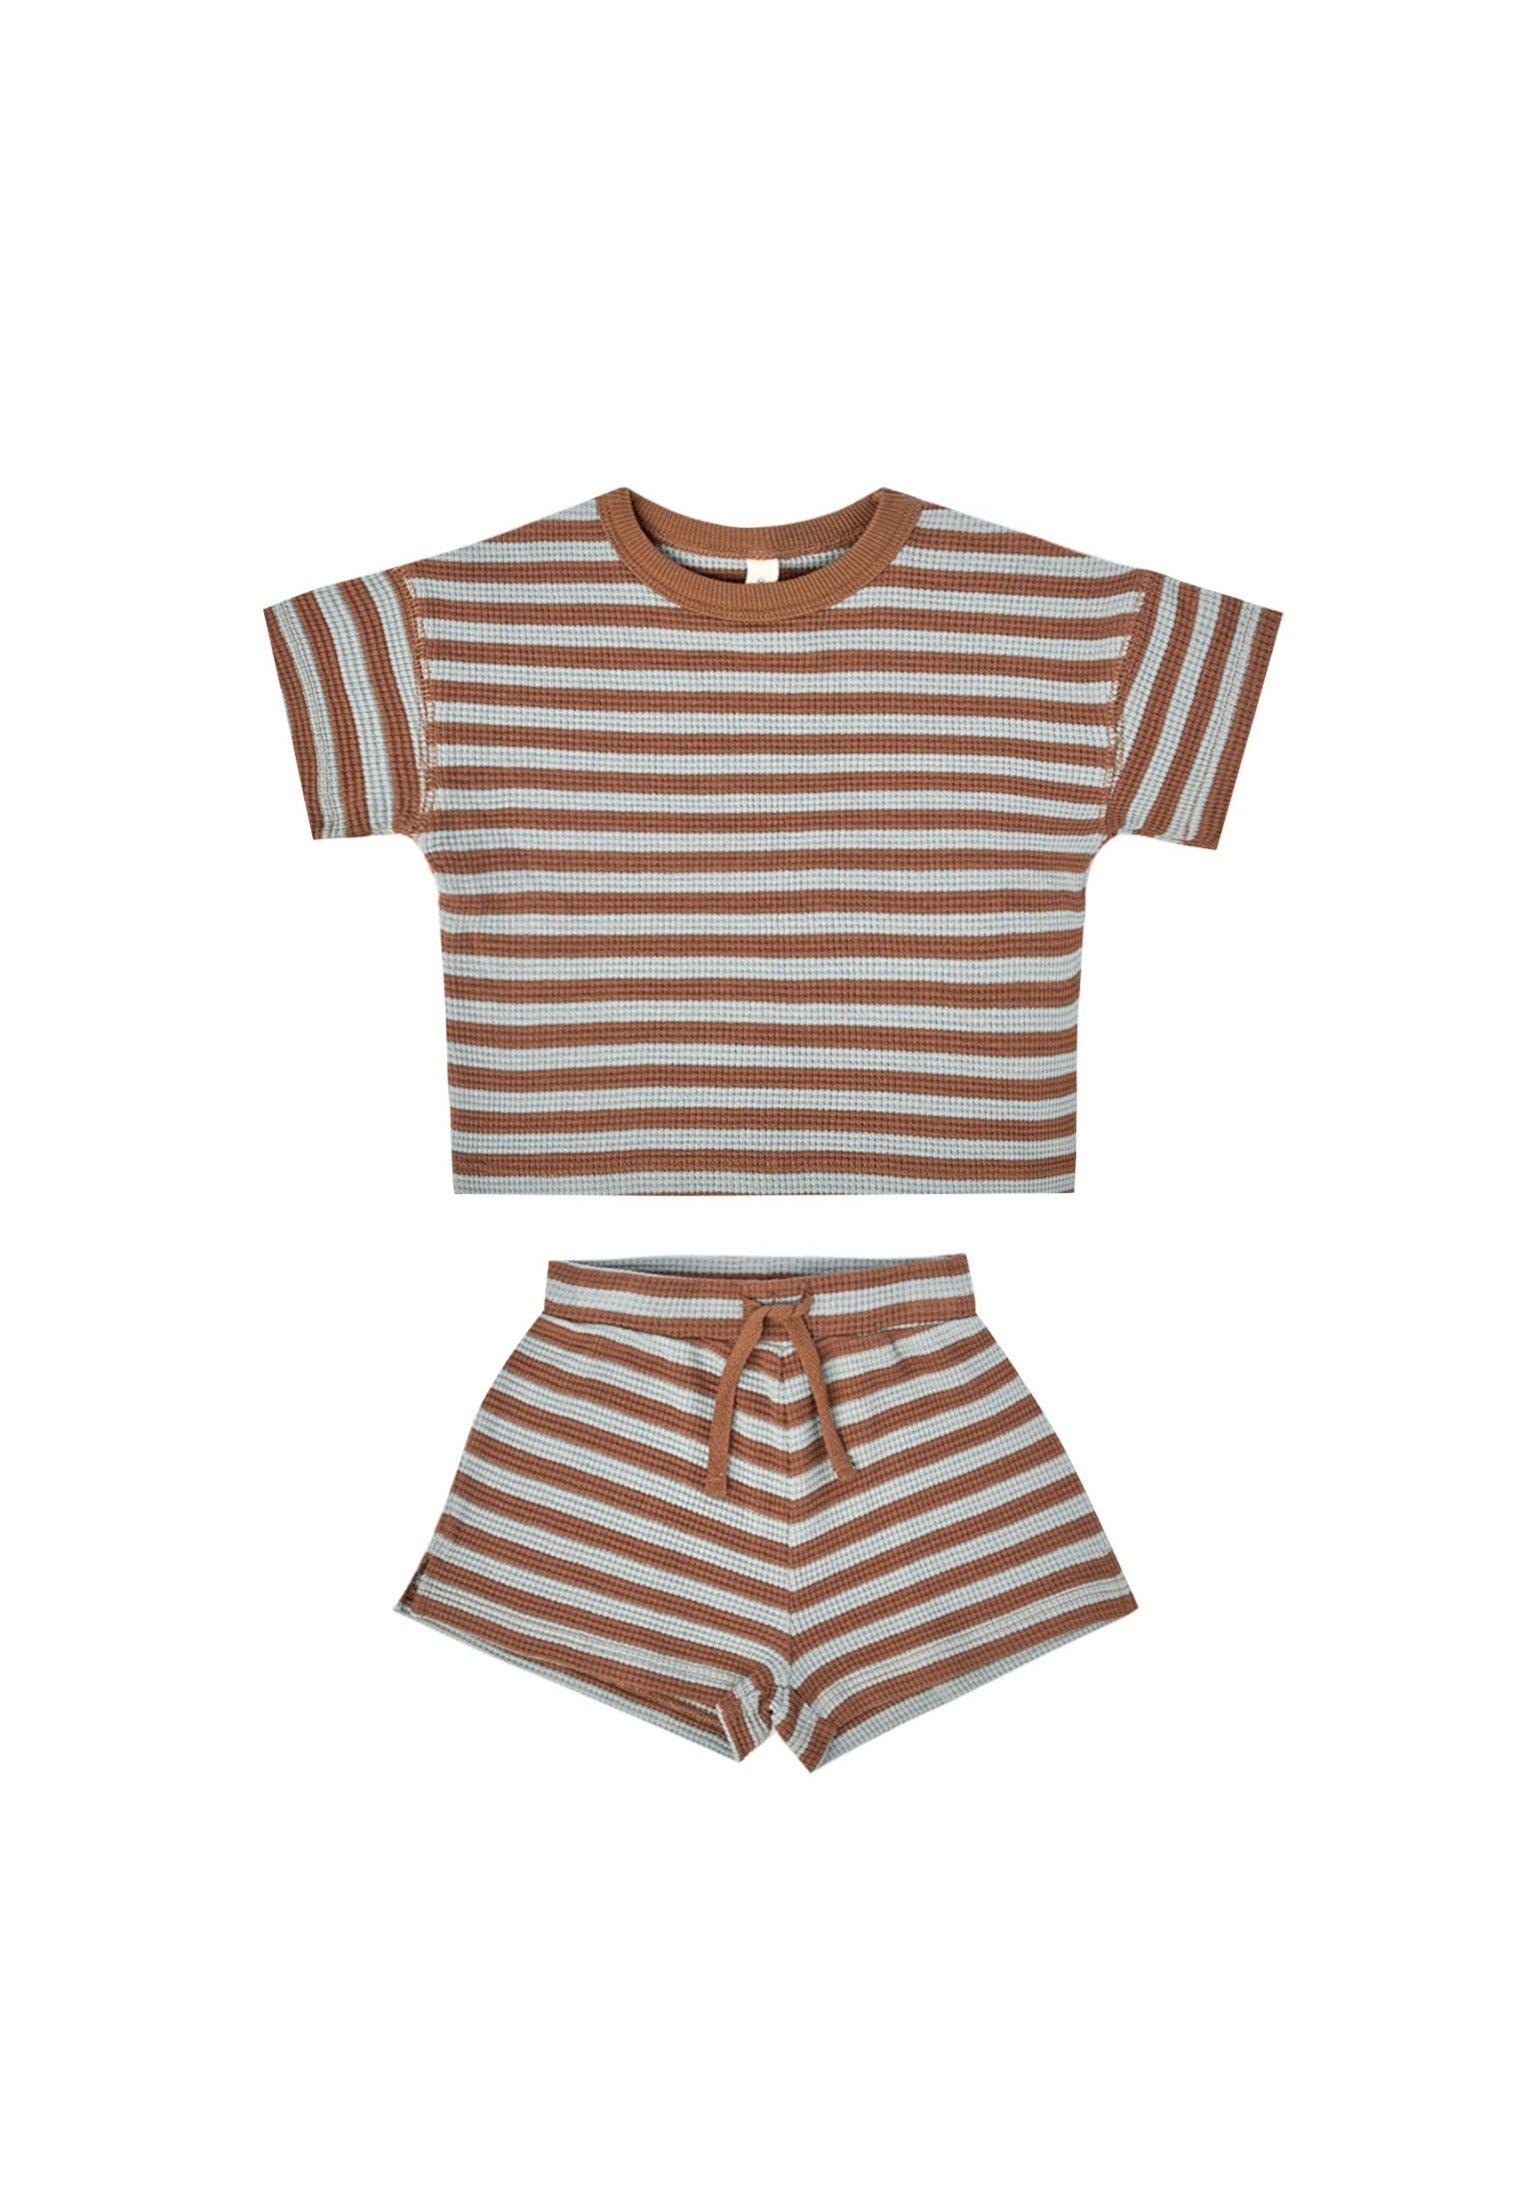 waffle short set, sienna, sky stripe - Why and Whale